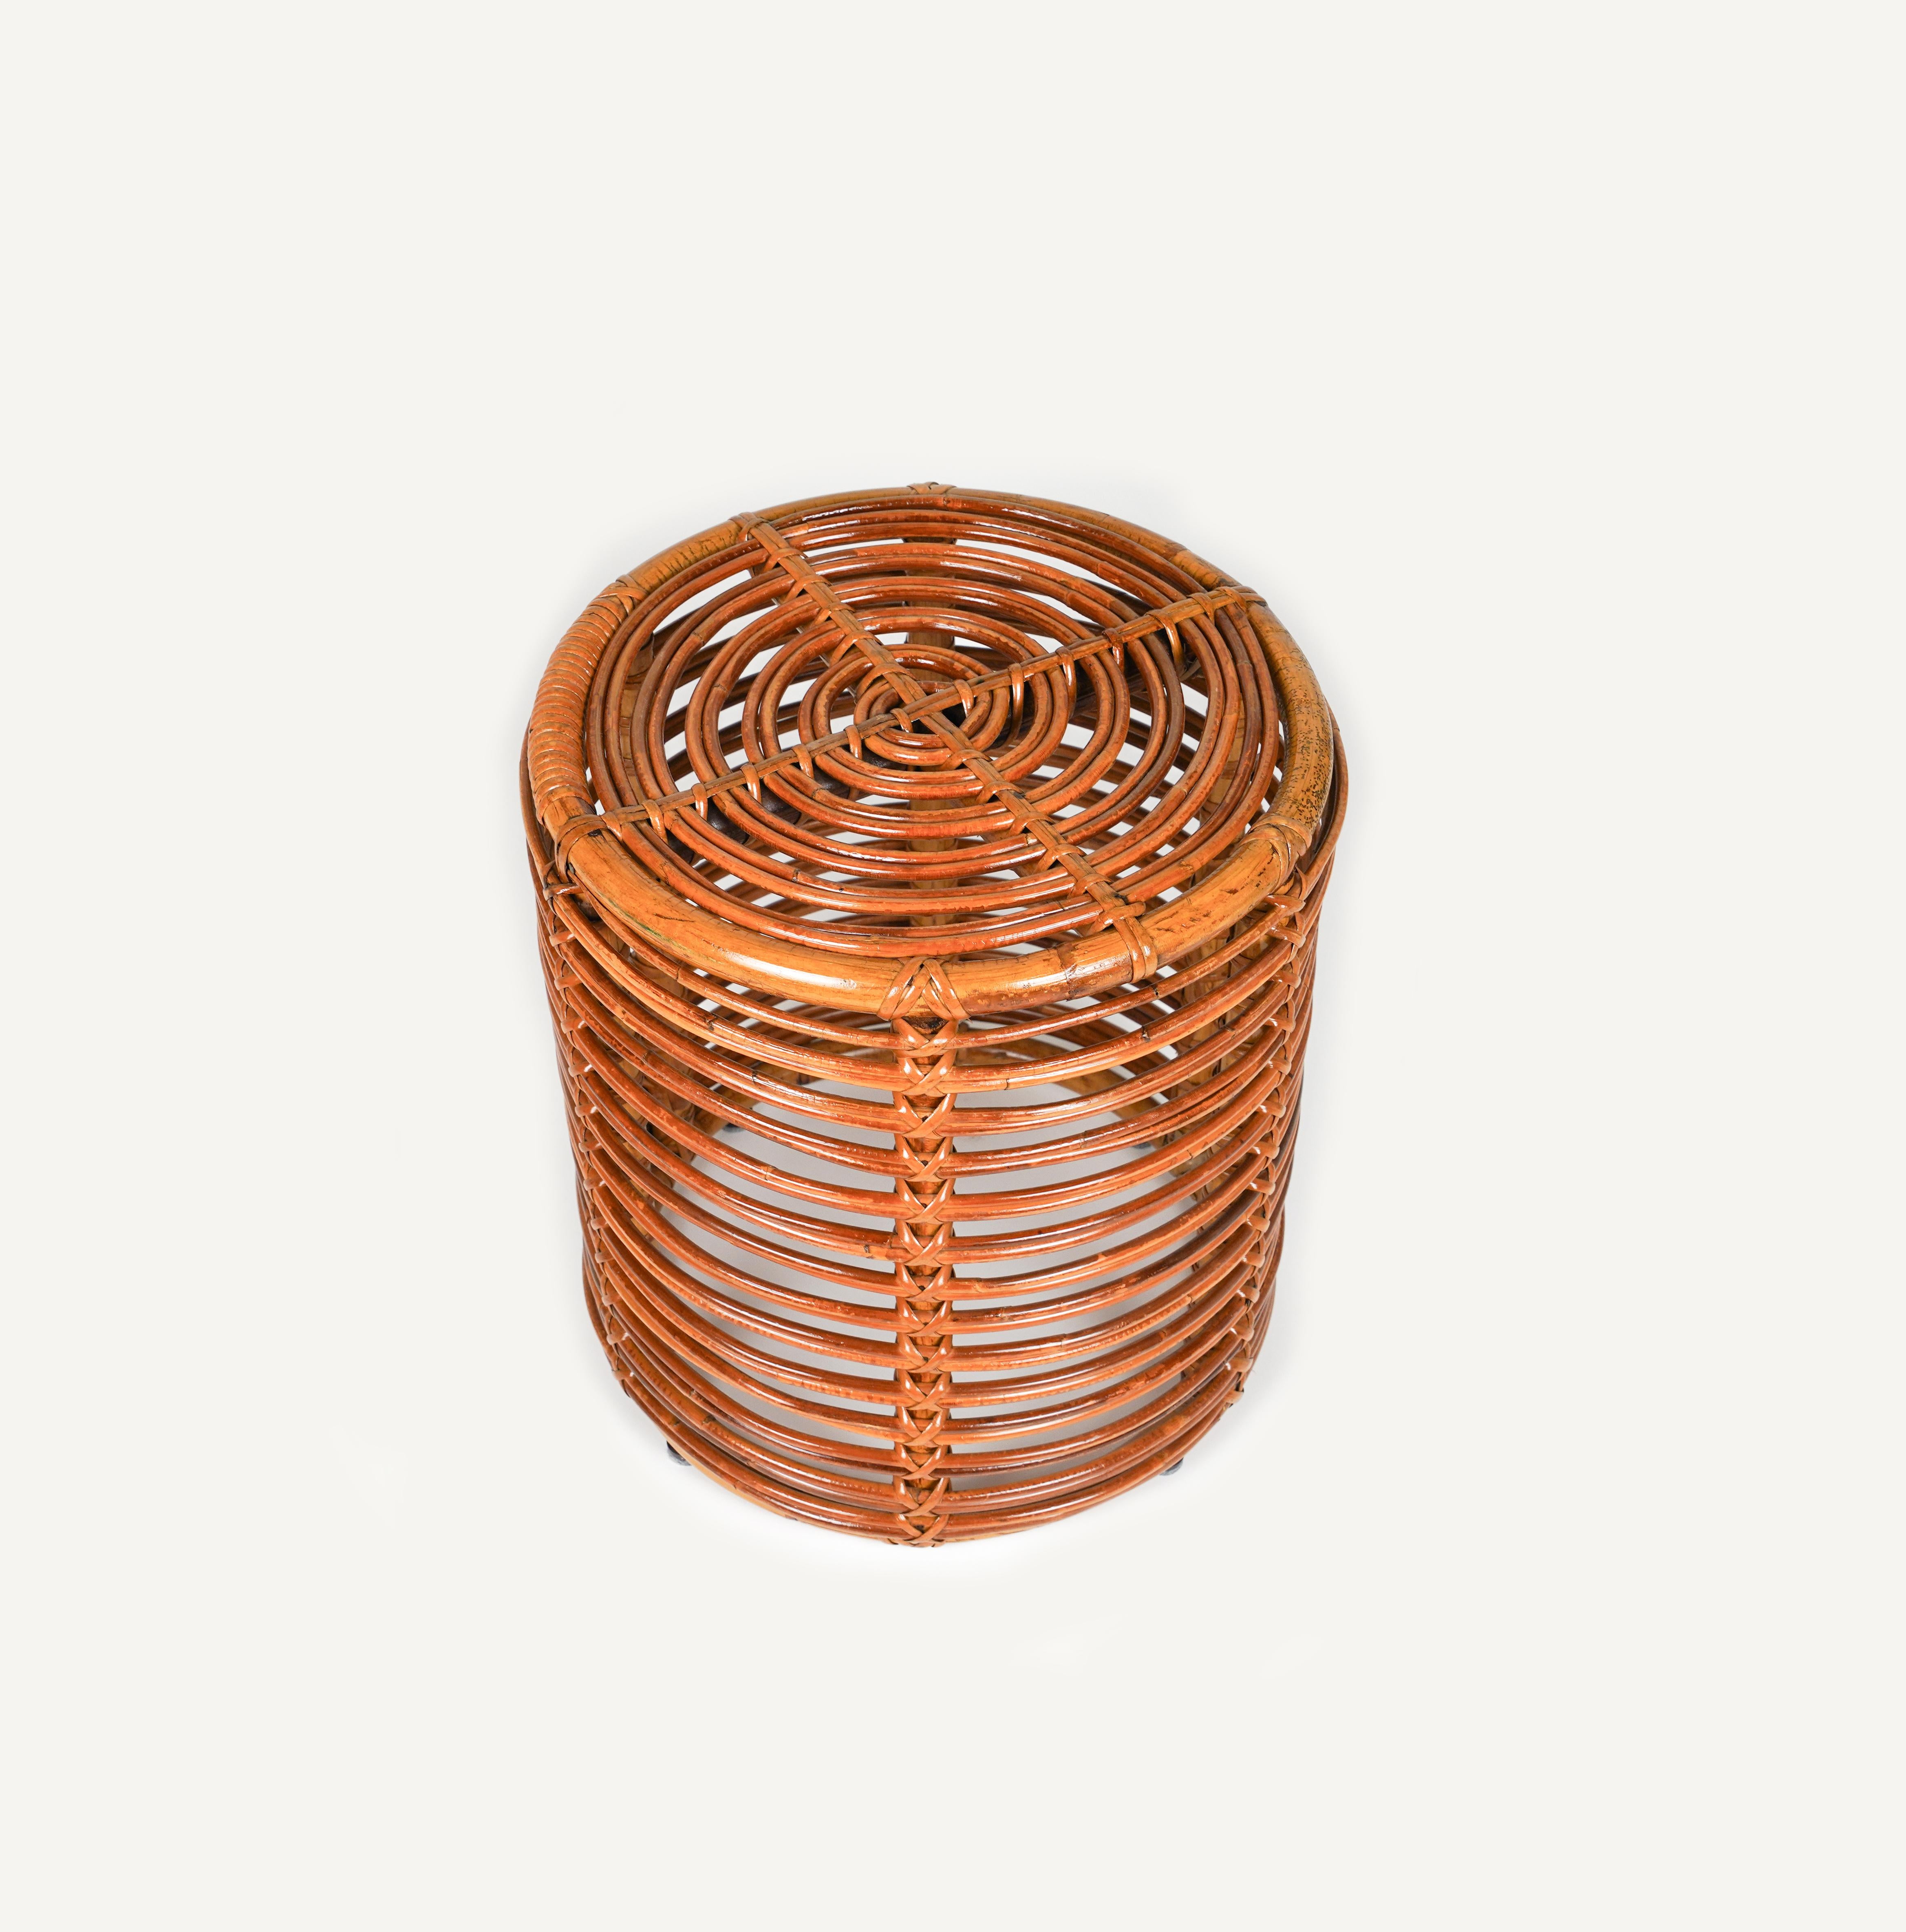 Mid-20th Century Midcentury Rattan and Bamboo Stool Pouf Tito Agnoli, Italy 1960s For Sale